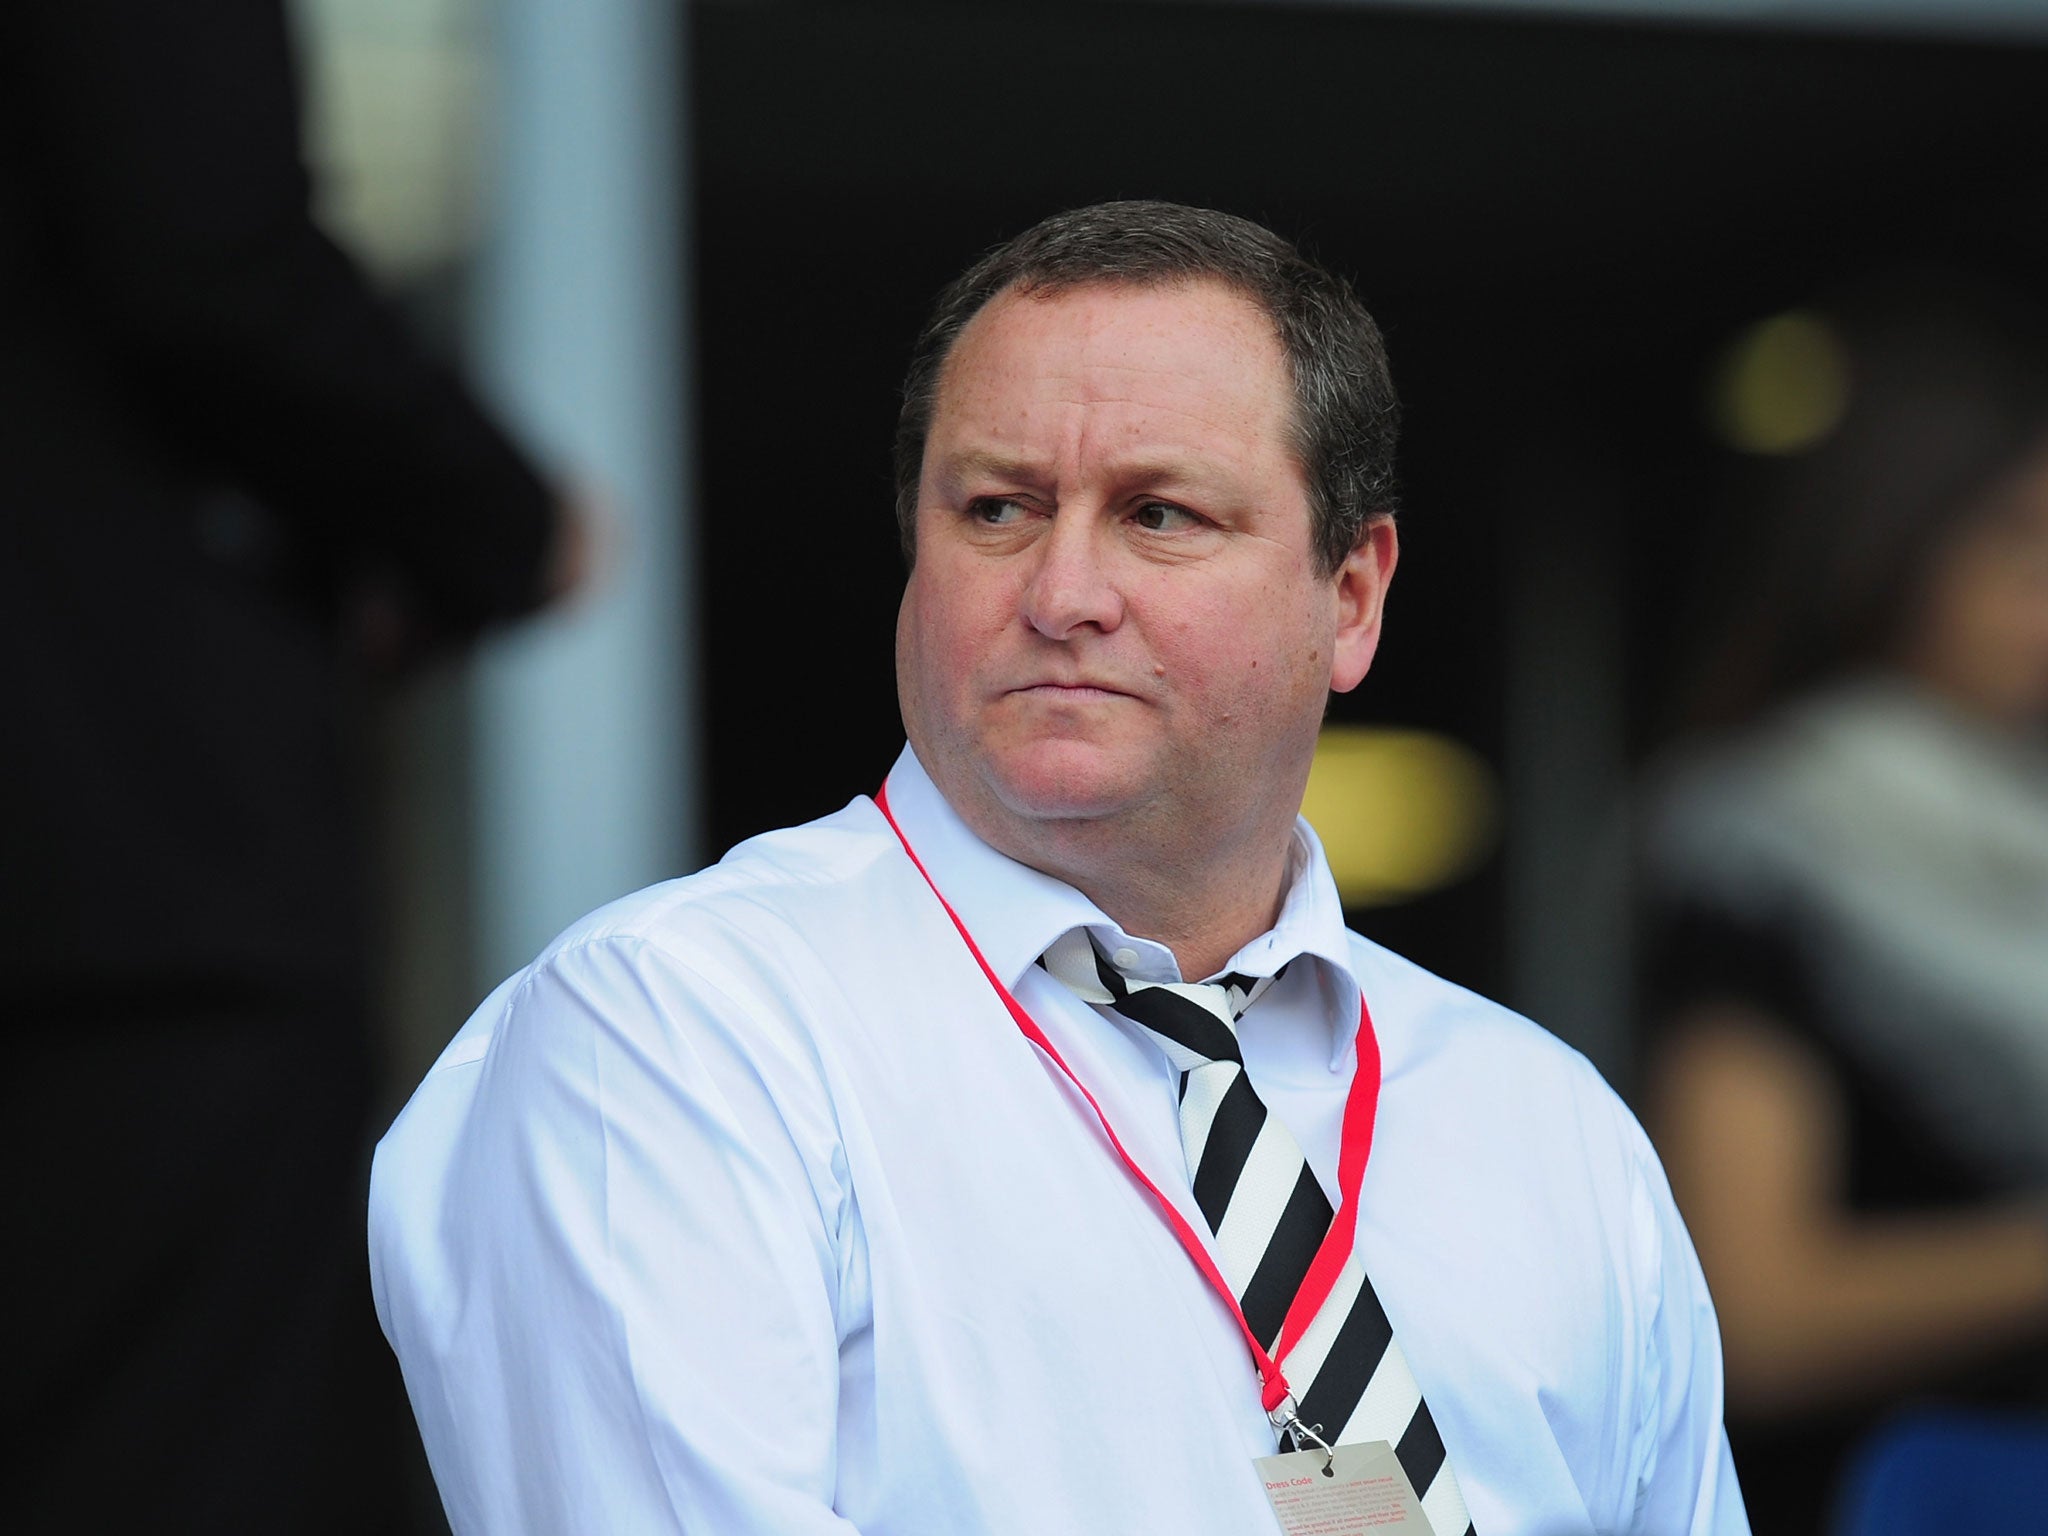 MPs want to ask Ashley about working practices at Sports Direct